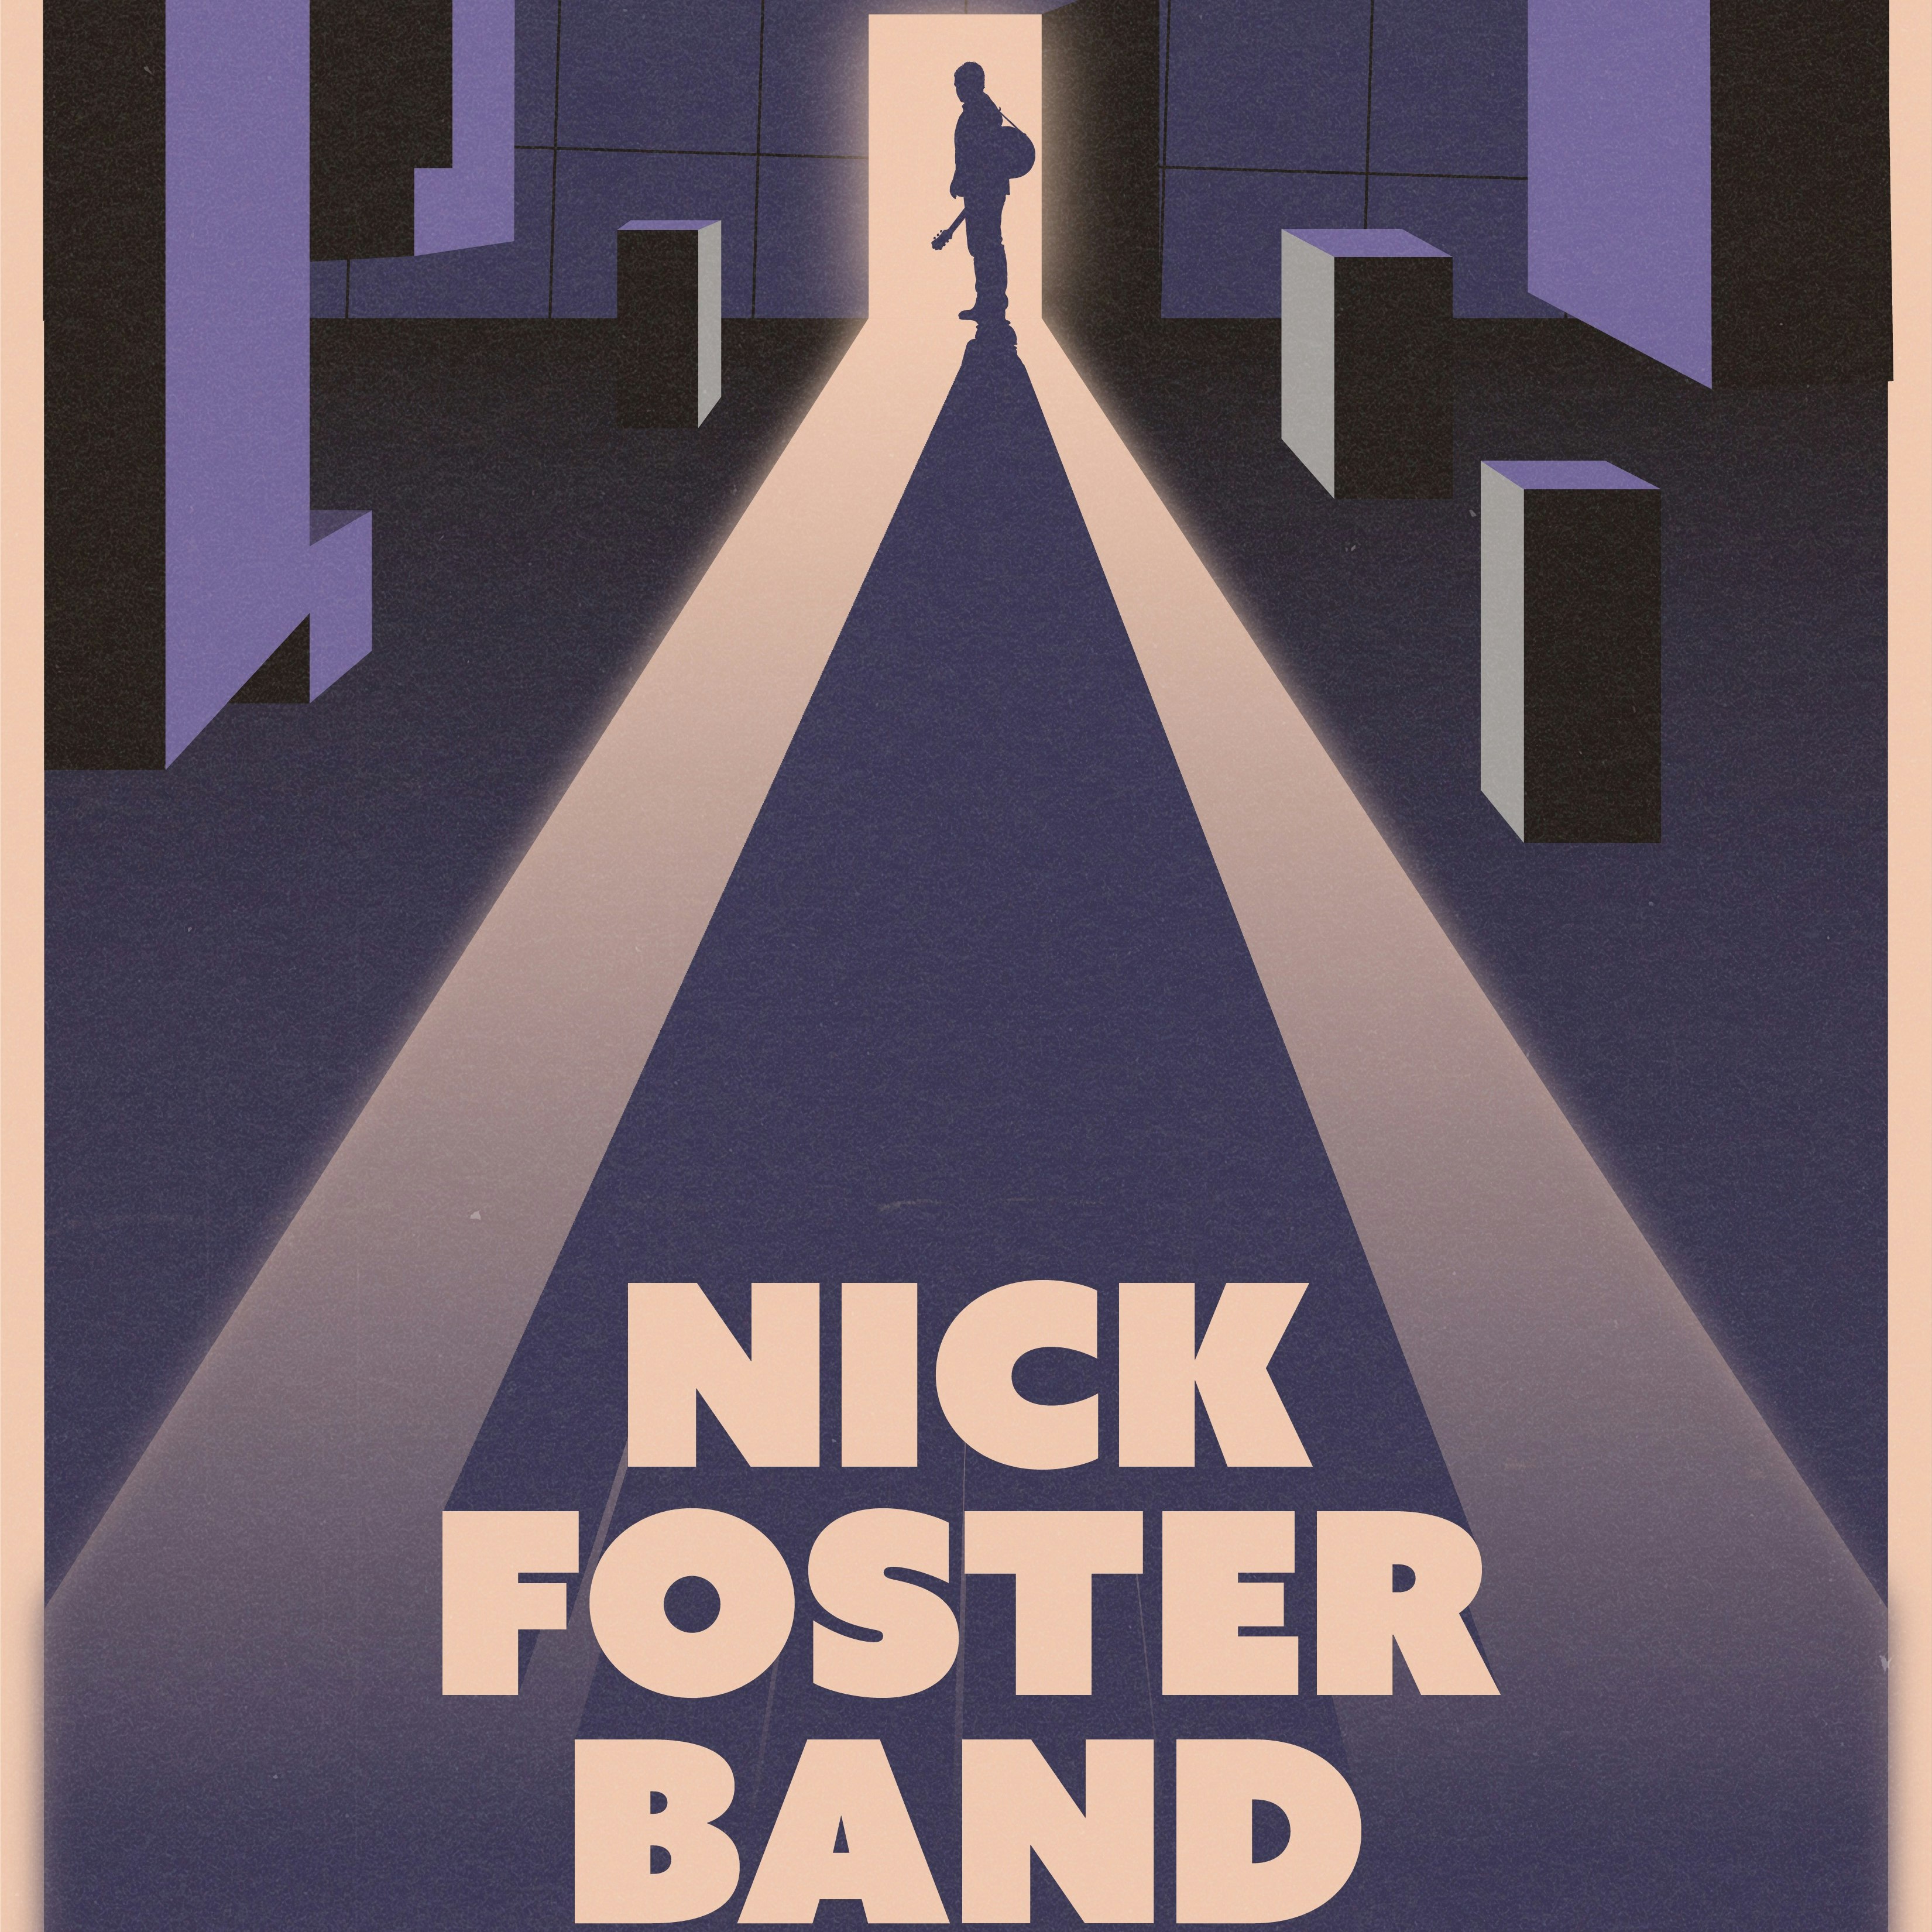 Nick Foster Band Album Release w/ Long Dark Moon, Marble